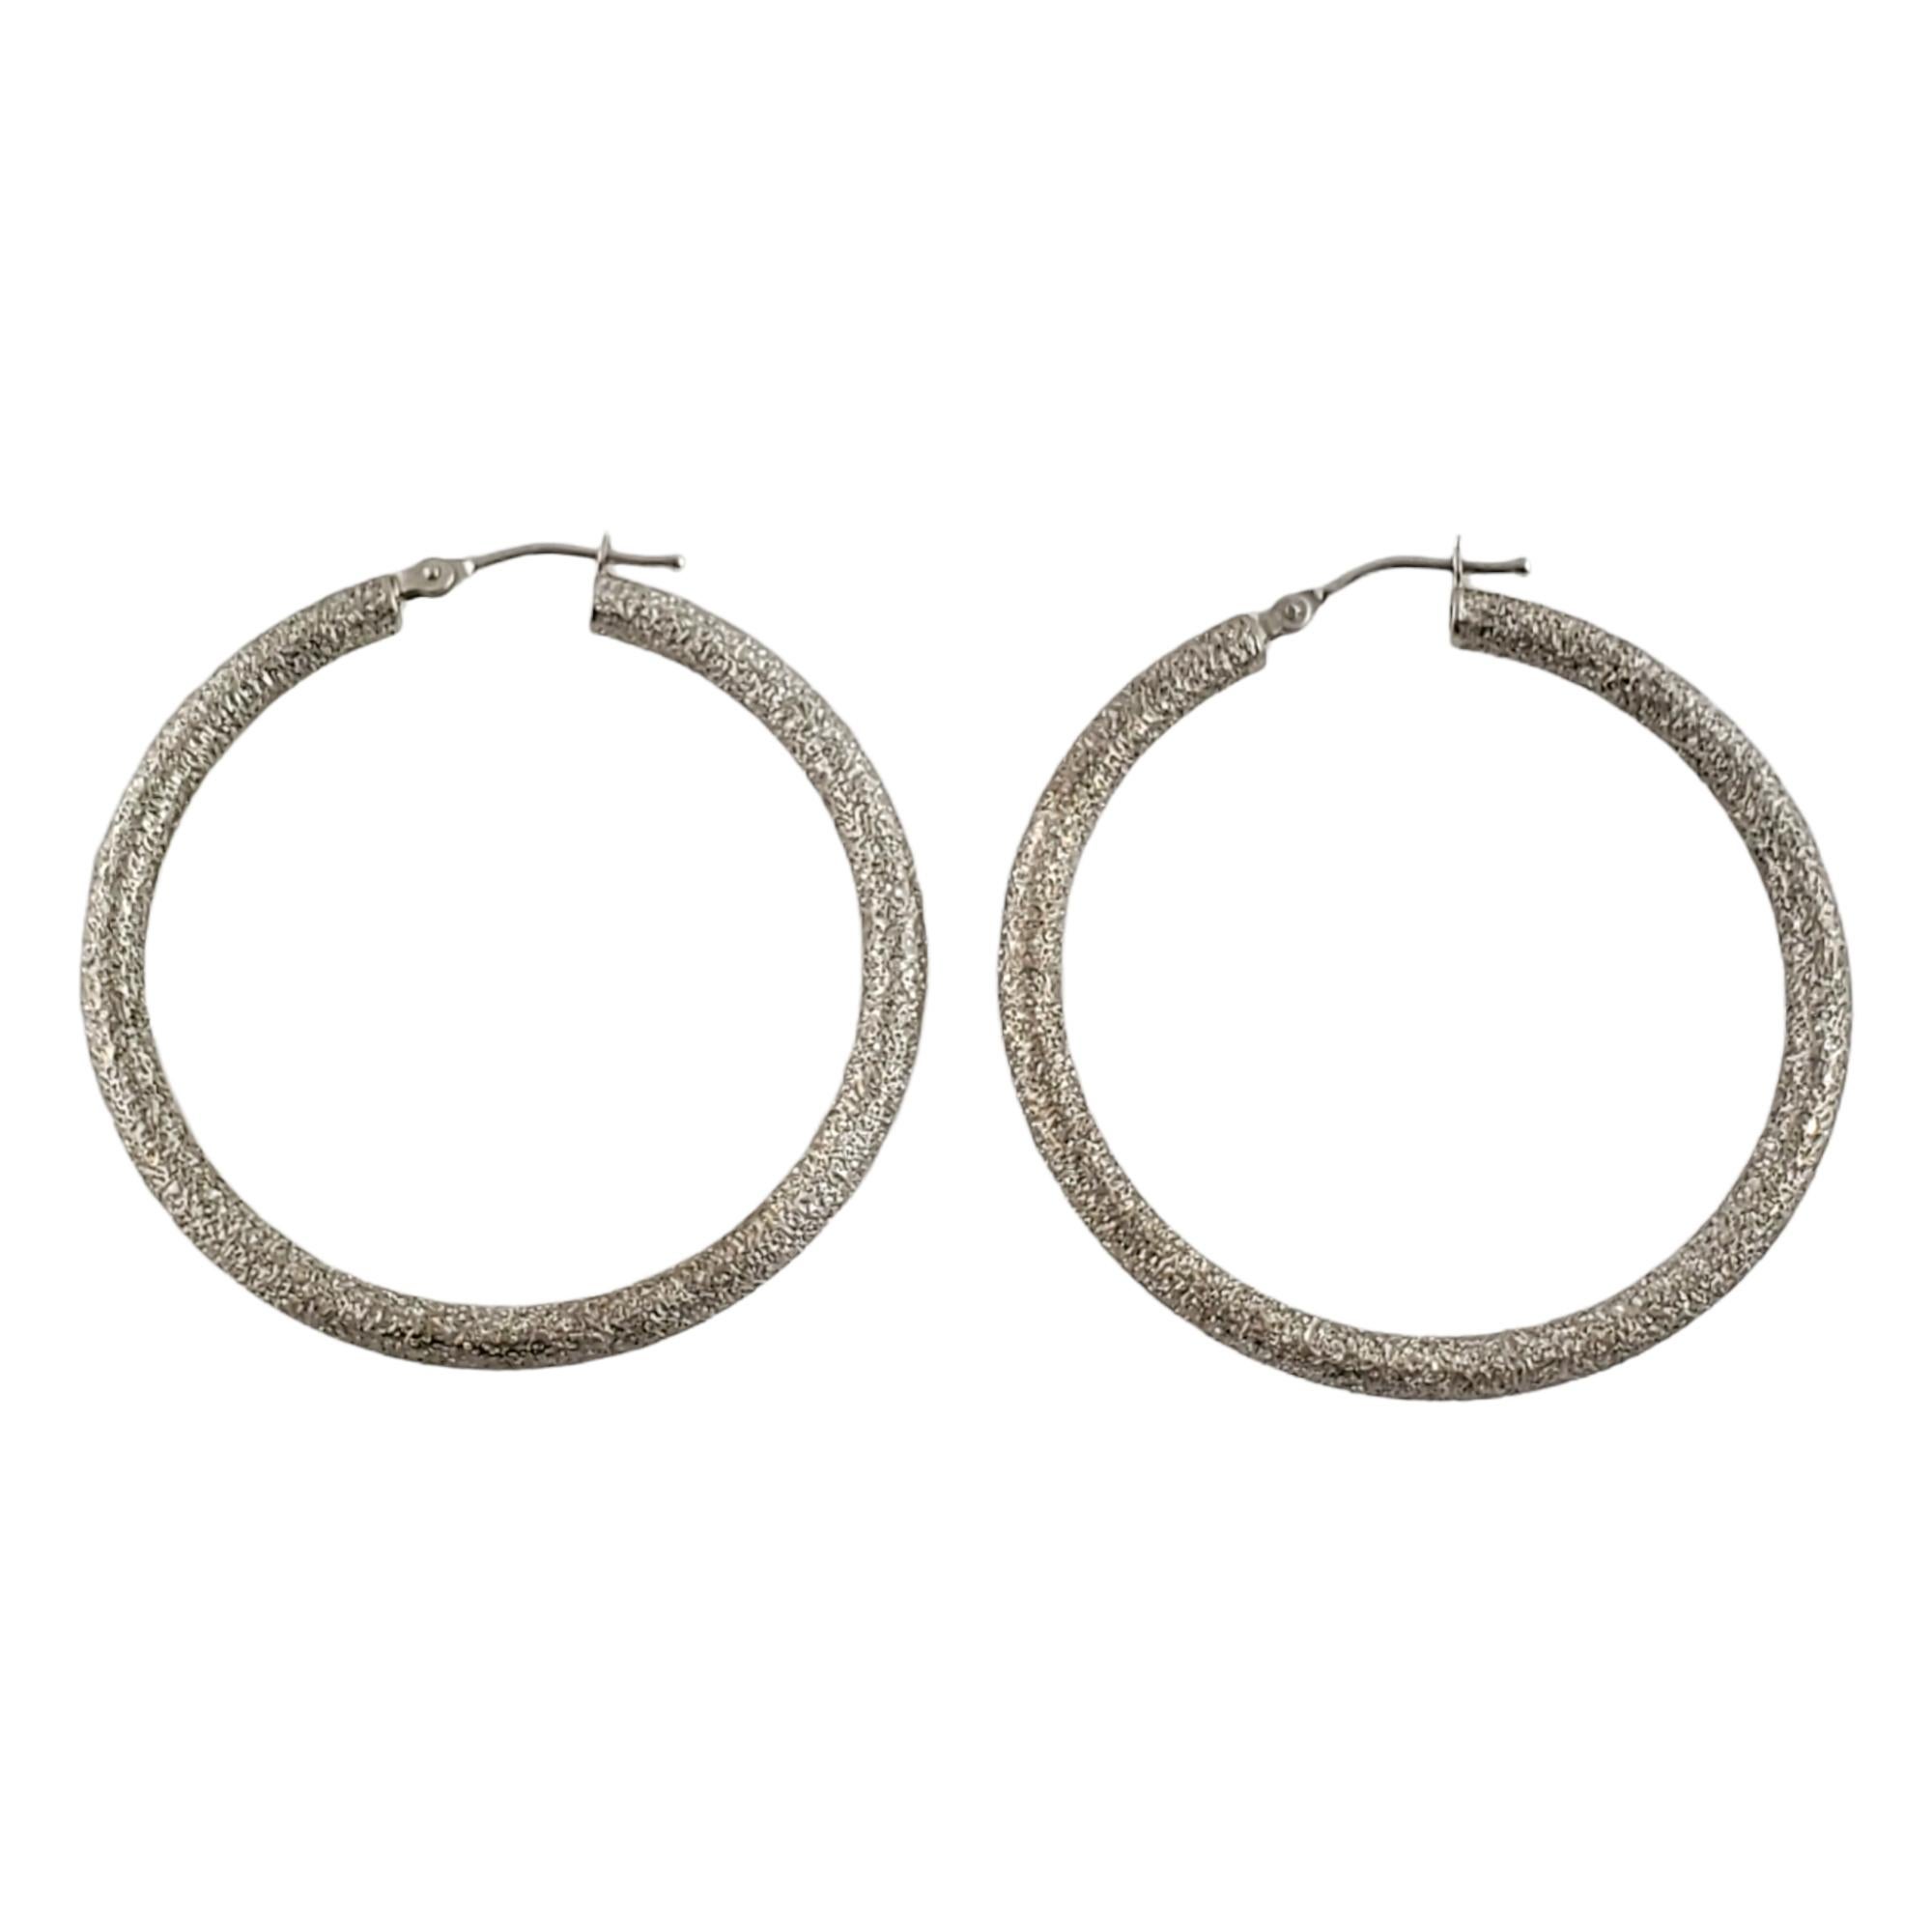 Vintage 14K White Gold Large Sparkle Hoop Earrings

This beautiful pair of 14K white gold hoops have a gorgeous sparkle to them!

Size: 40 mm X 40 mm X 3.5 mm

Weight: 3.1 gr/ 2.0 dwt

Hallmark: 14KT Italy

Very good condition, professionally